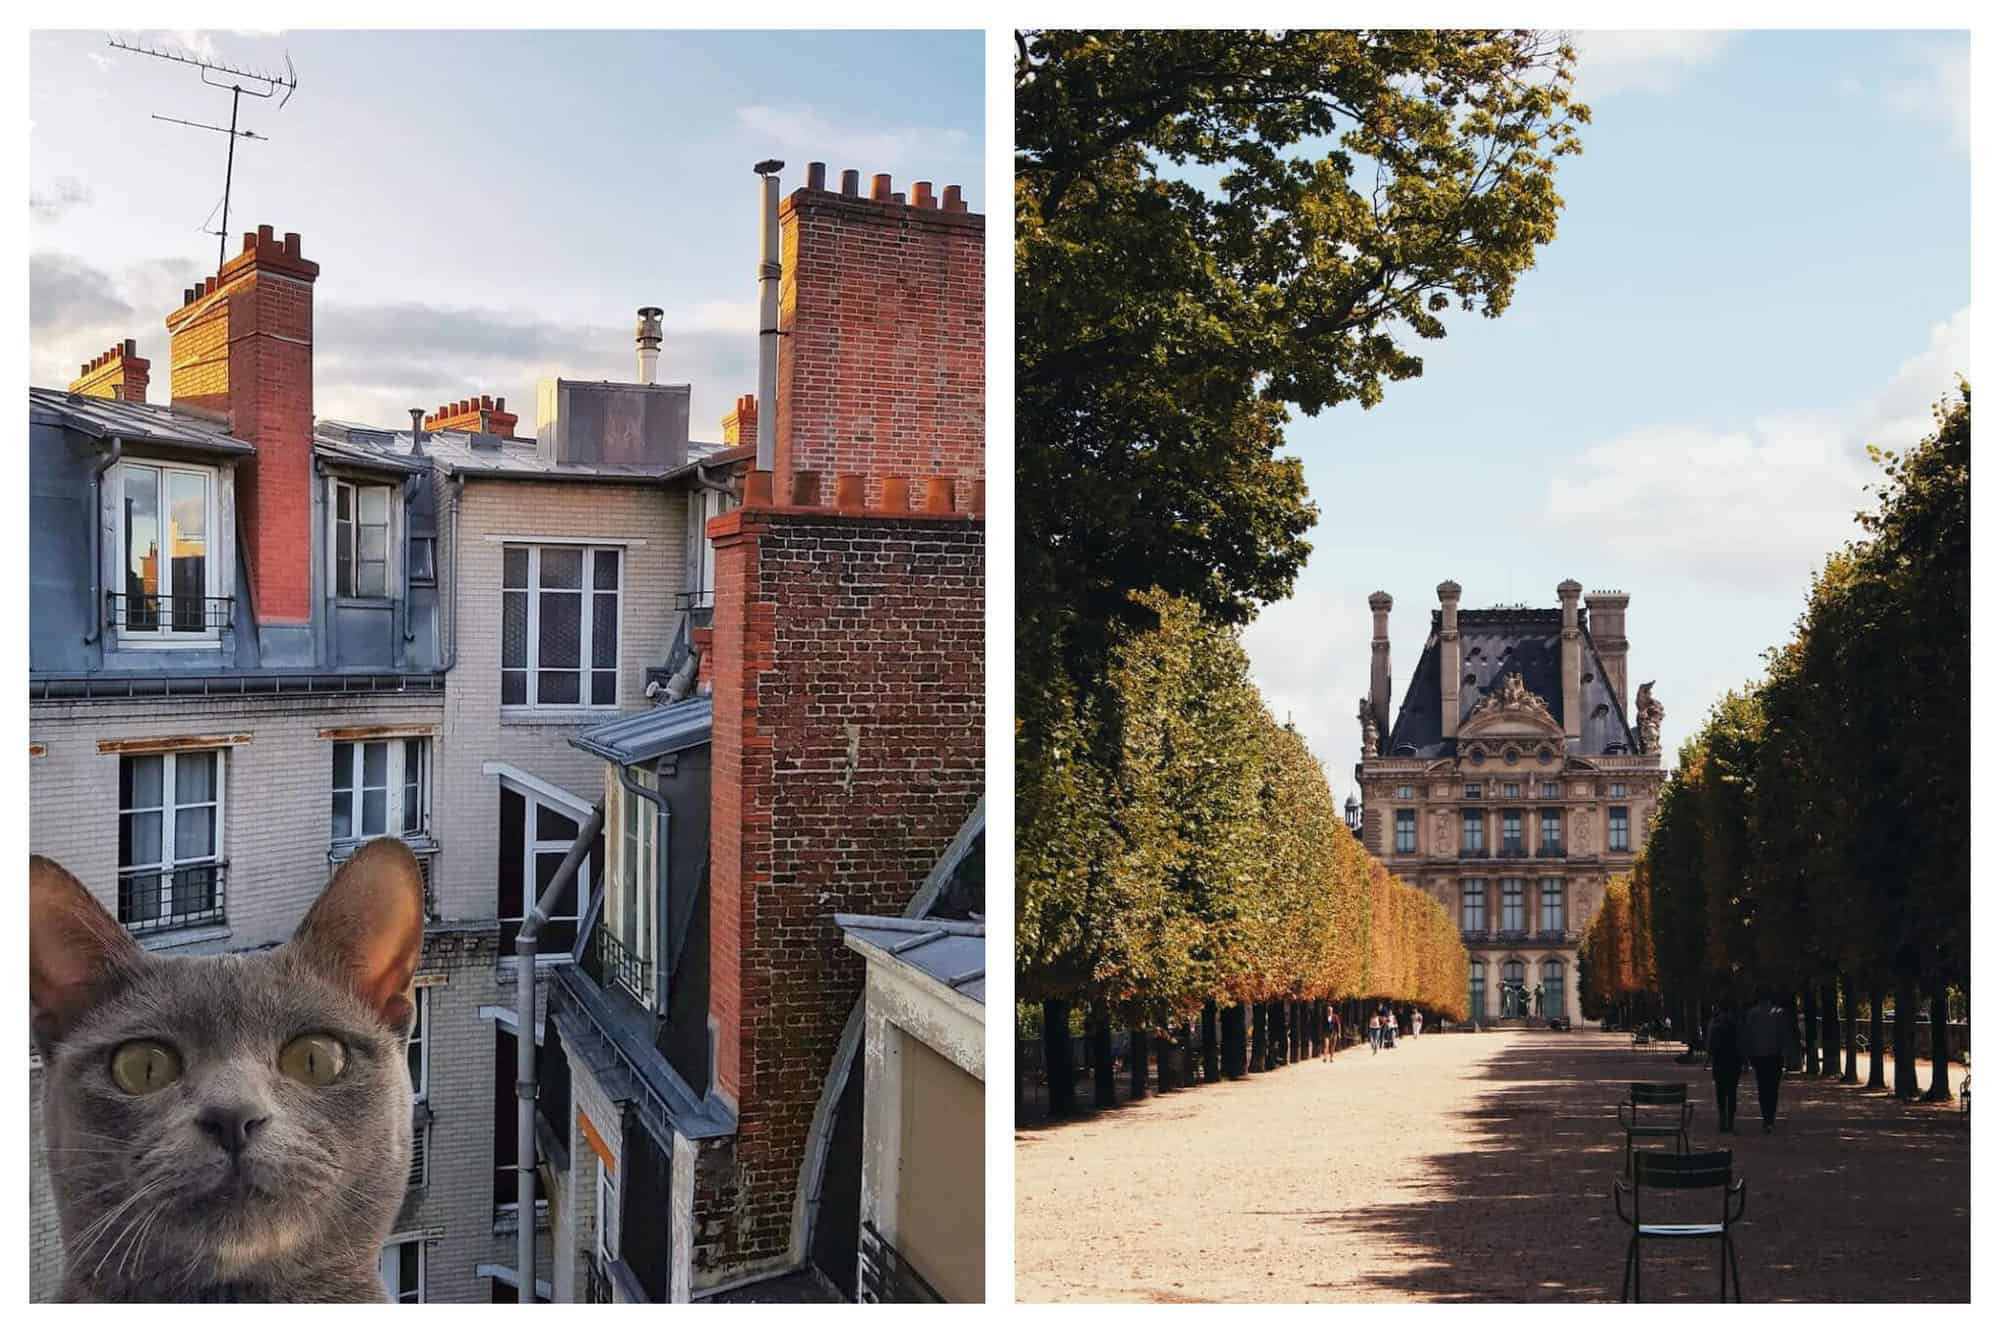 Left: A view of Parisian apartment buildings. The buildings are close together and there are several brick chimney stacks. There is a gray cat peeking it's head into the frame on the left. Right: A view of the Louvre Museum in the Tuileries Gardens in Paris. It is an elaborately detailed stone building. A path lined with trees with the leaves changing leads to the museum. There are empty chairs on the path to the right.